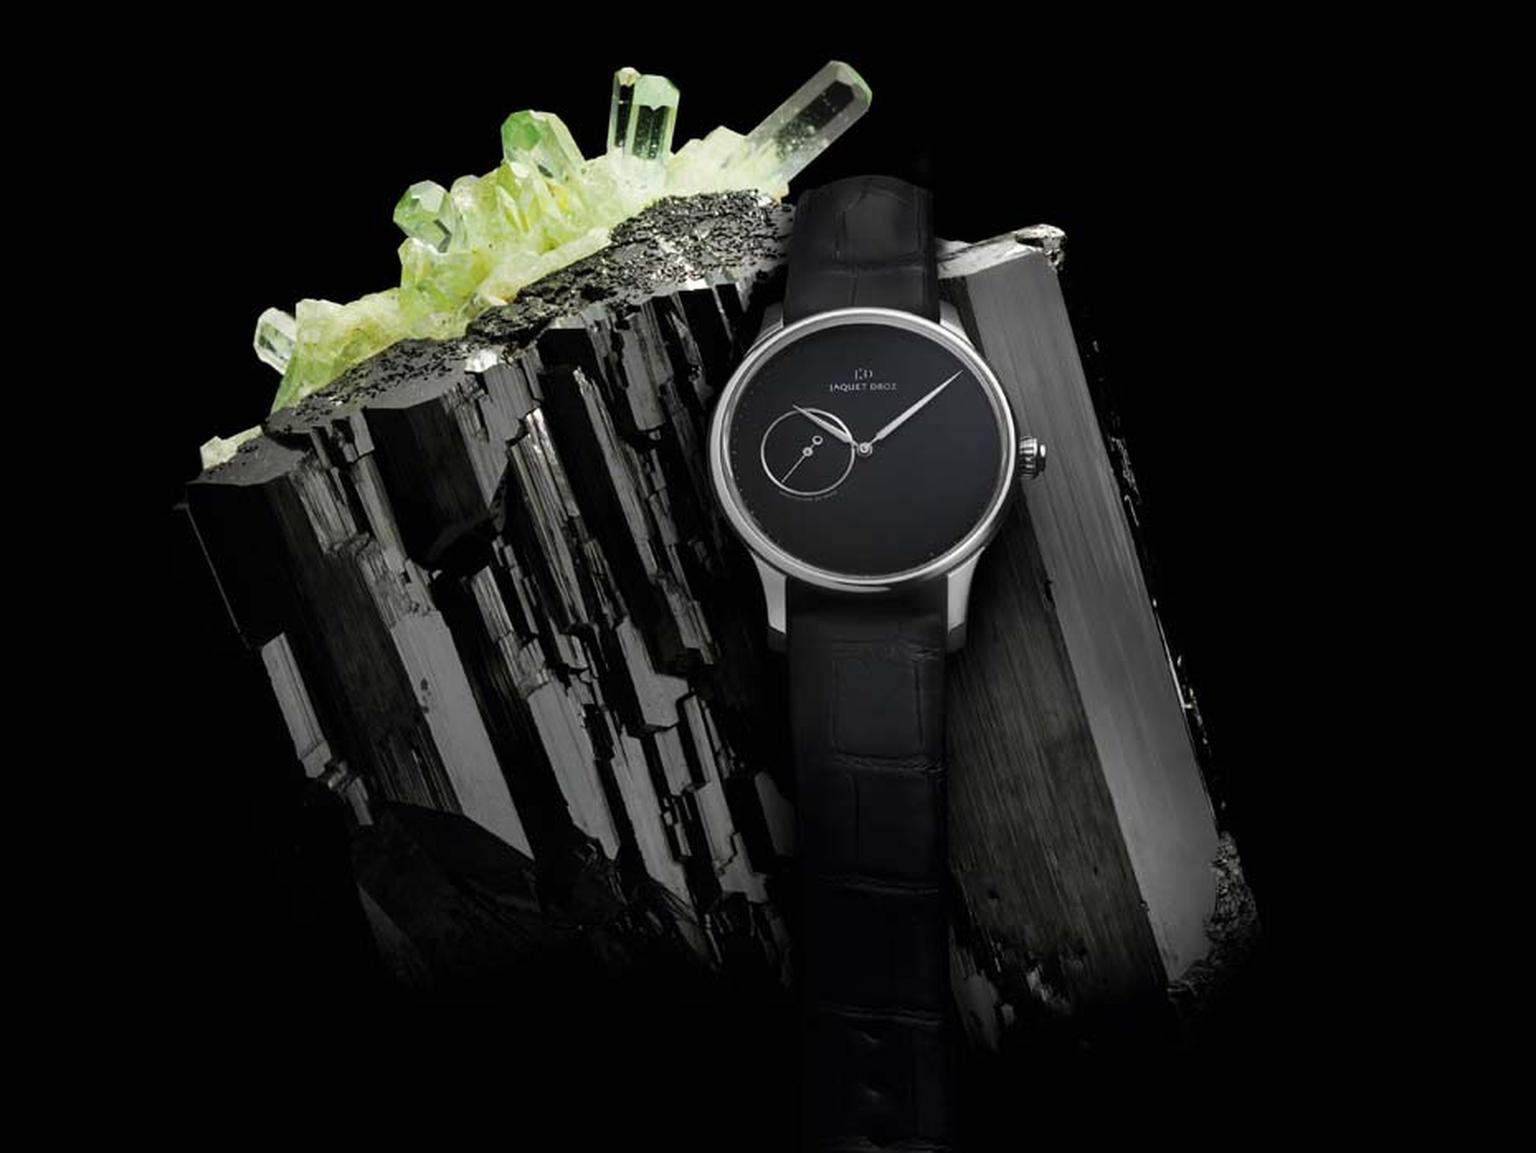 Jaquet Droz Minerals collection Grande Heure Minute watch with an onyx dial.